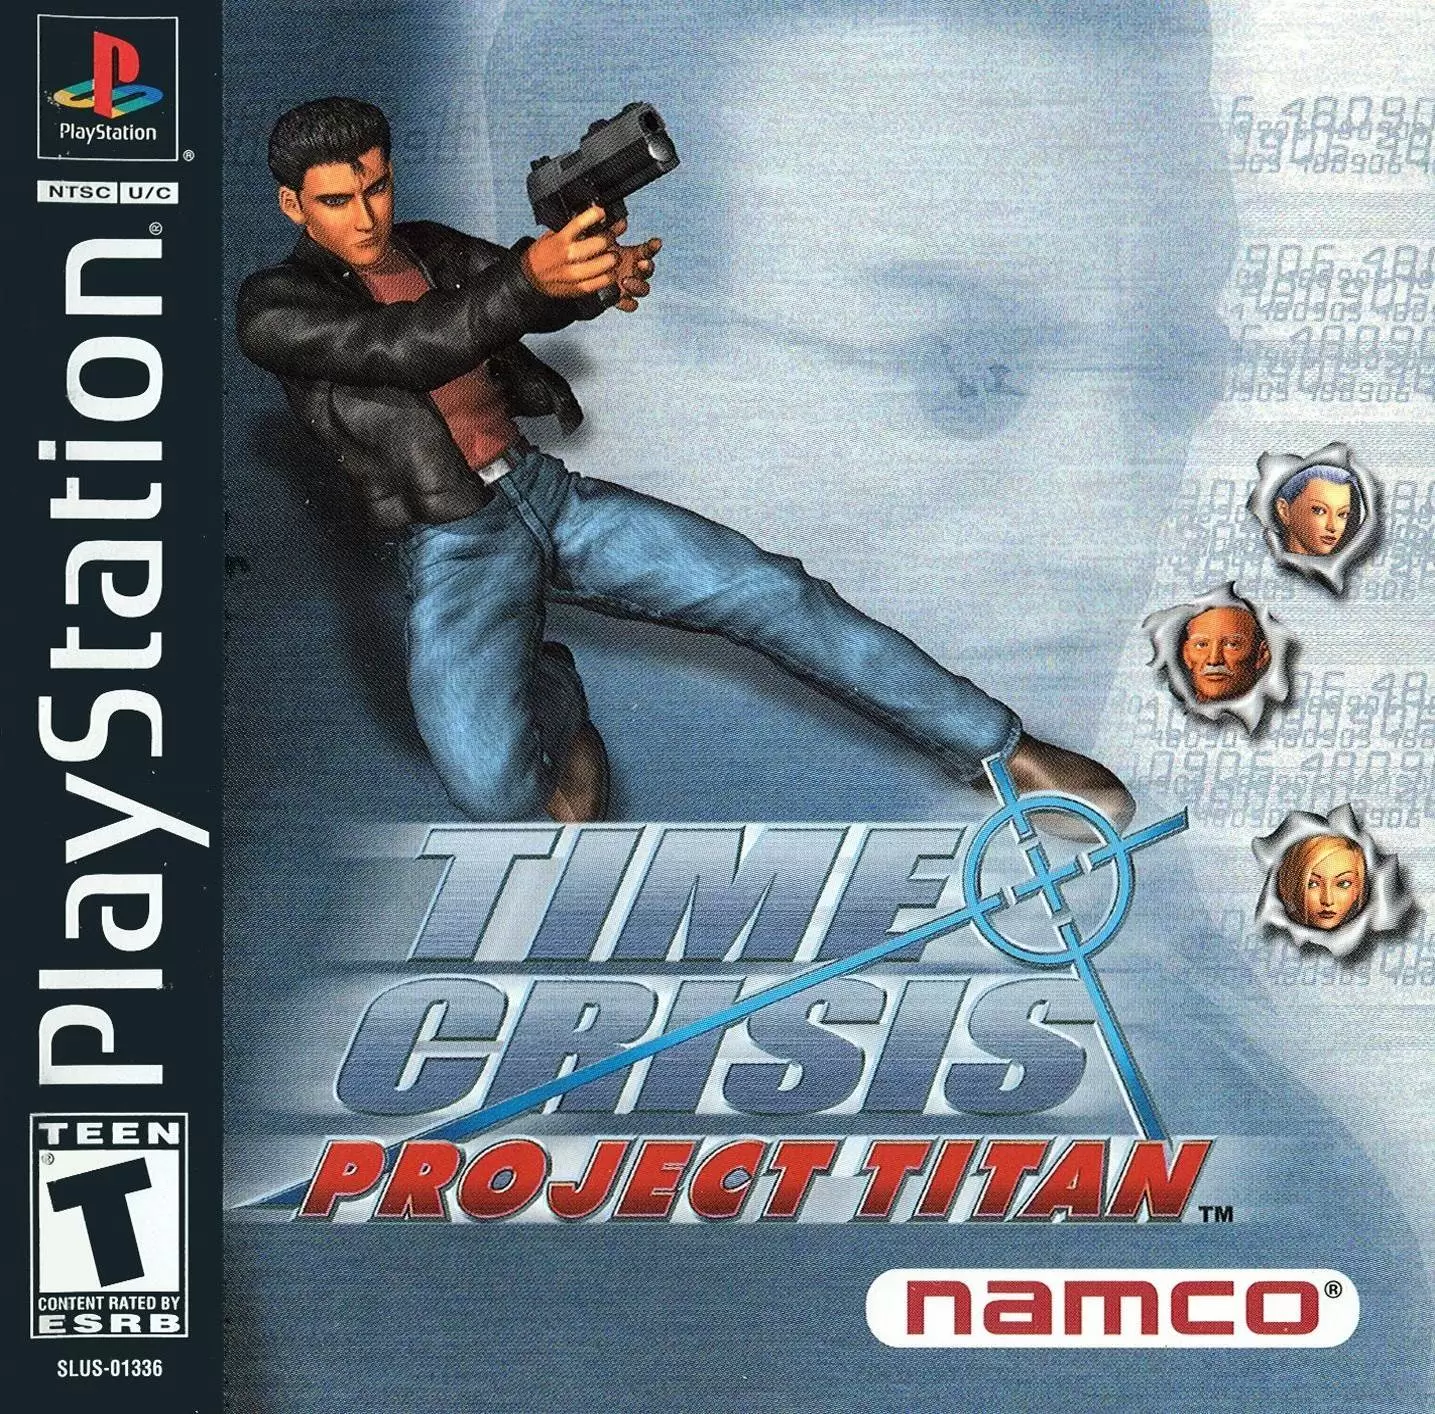 Playstation games - Time Crisis: Project Titan